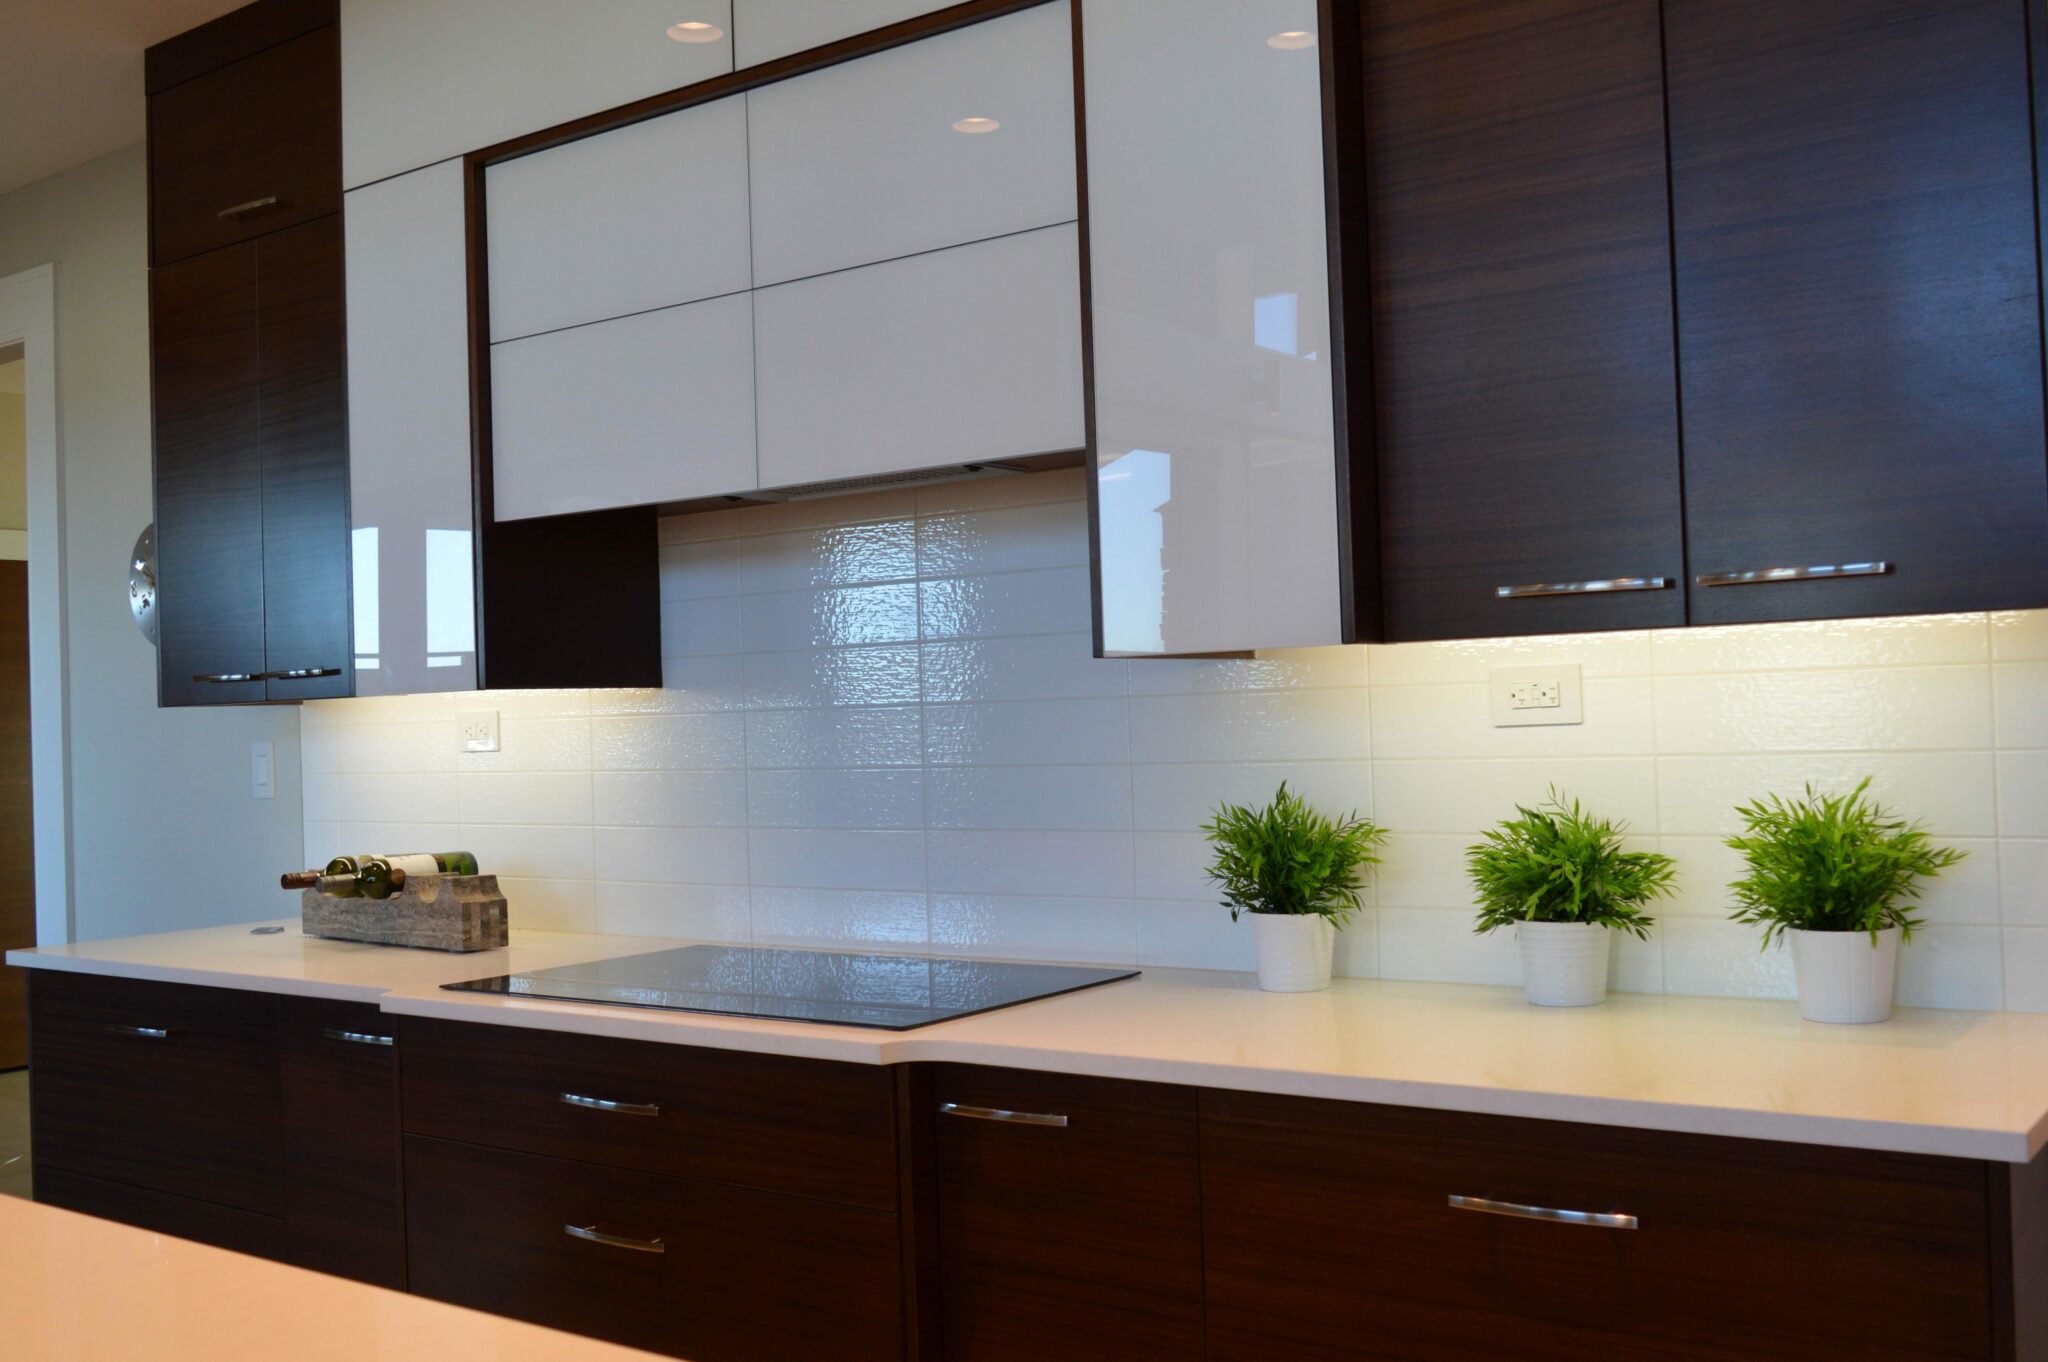 How to Choose the Best Kitchen Cabinet Material for Your Home